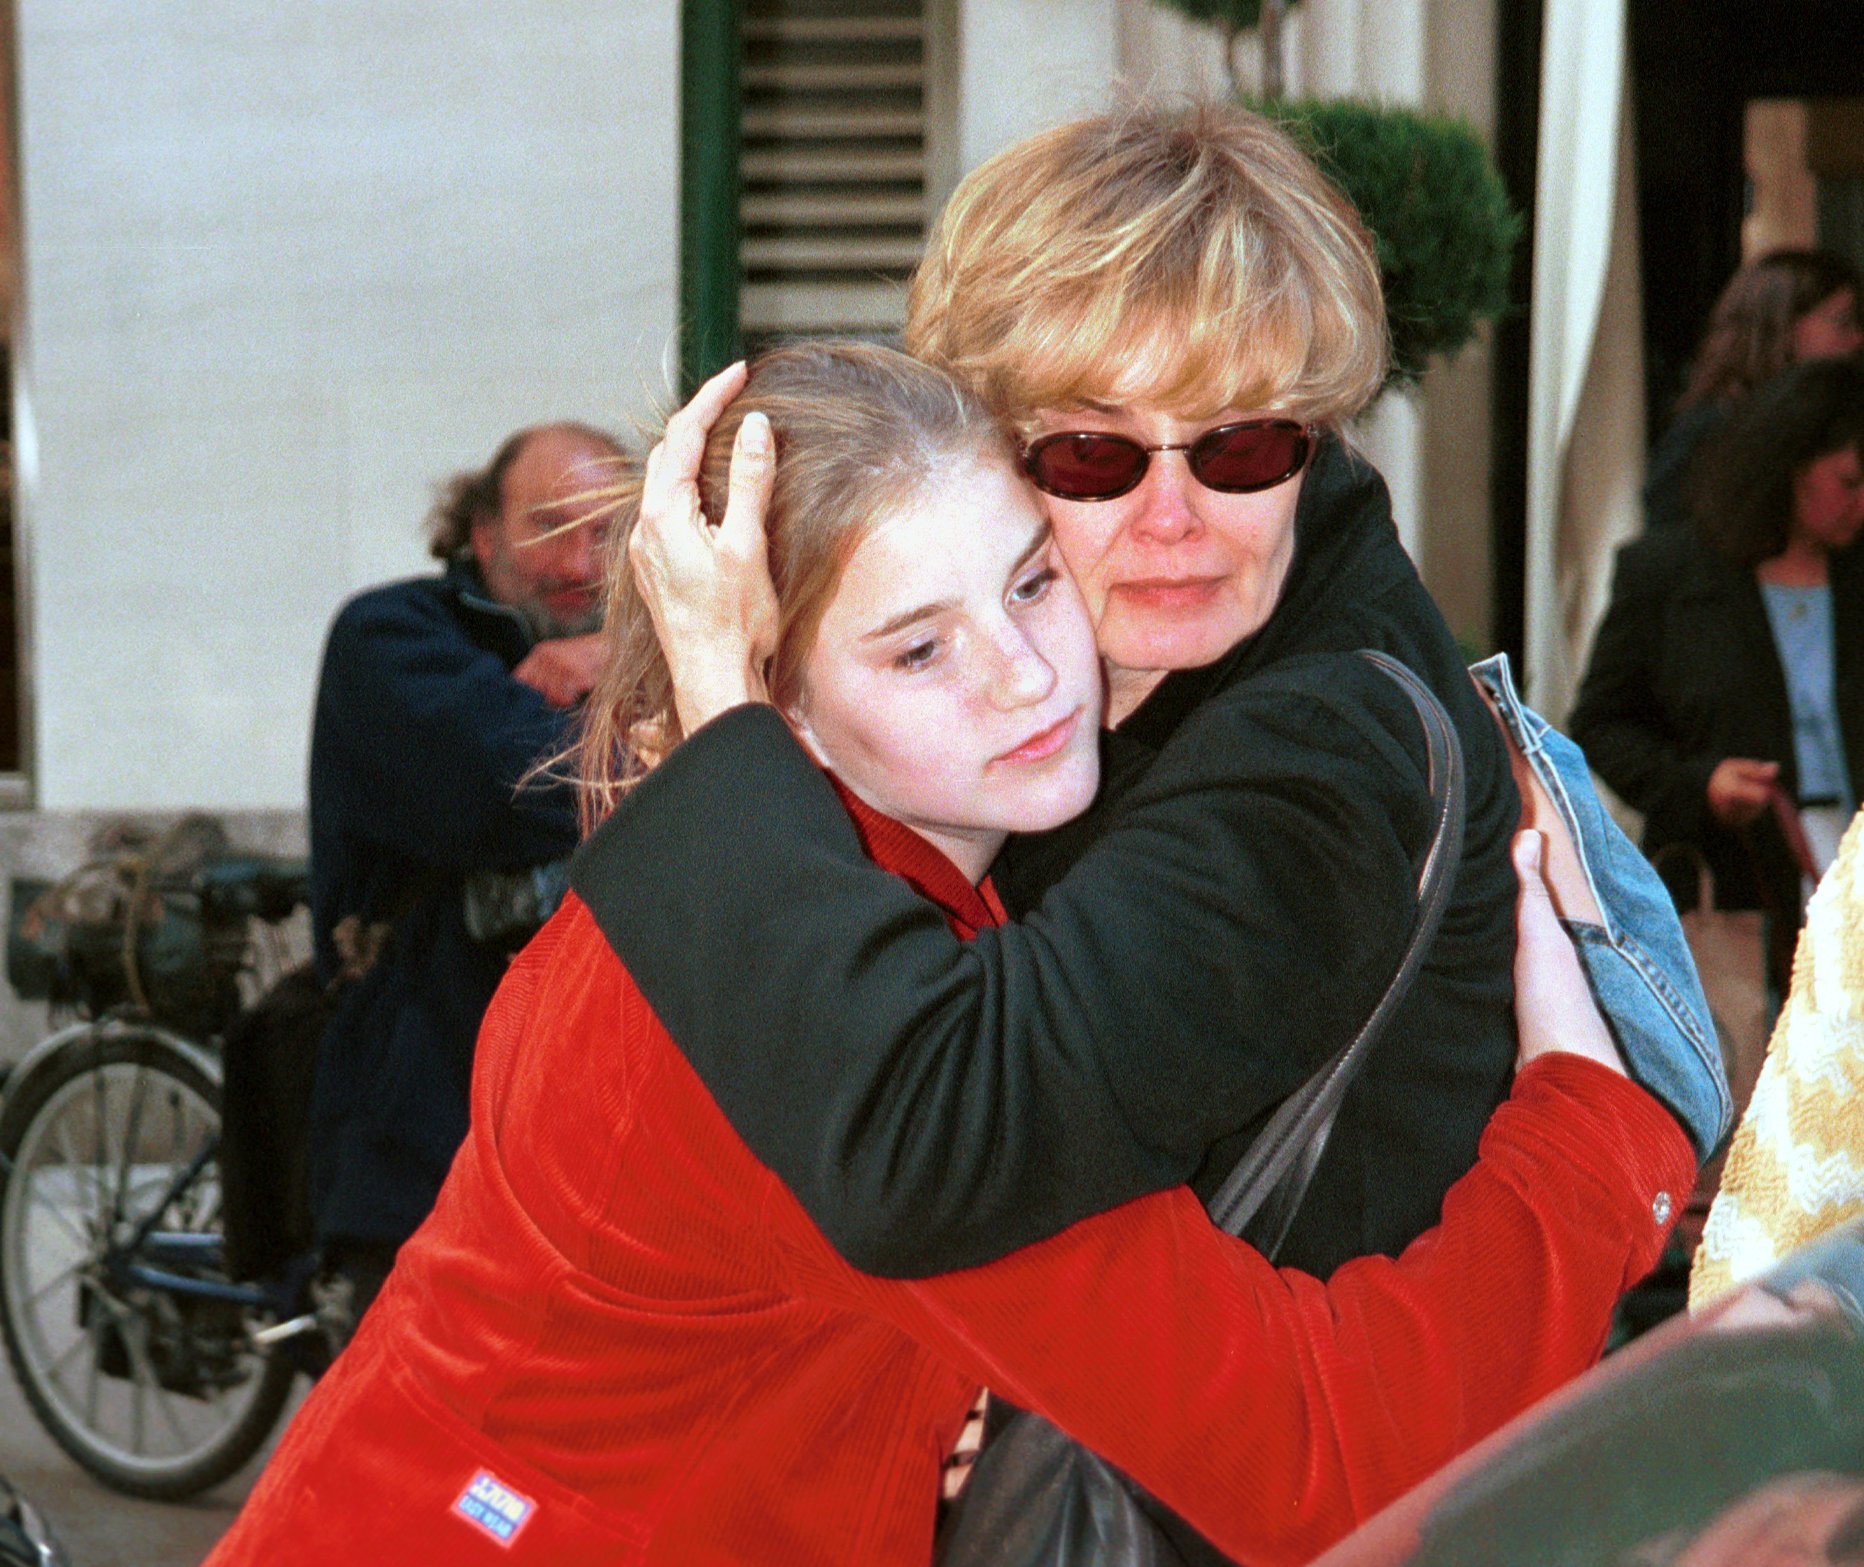 Jessica Lange says goodbye to her daughter Hannah Jane (Sam Sheppard's daughter) October 23, 2000 in front of a mid-town hotel before she left in a taxi in New York City. | Source: Getty Images